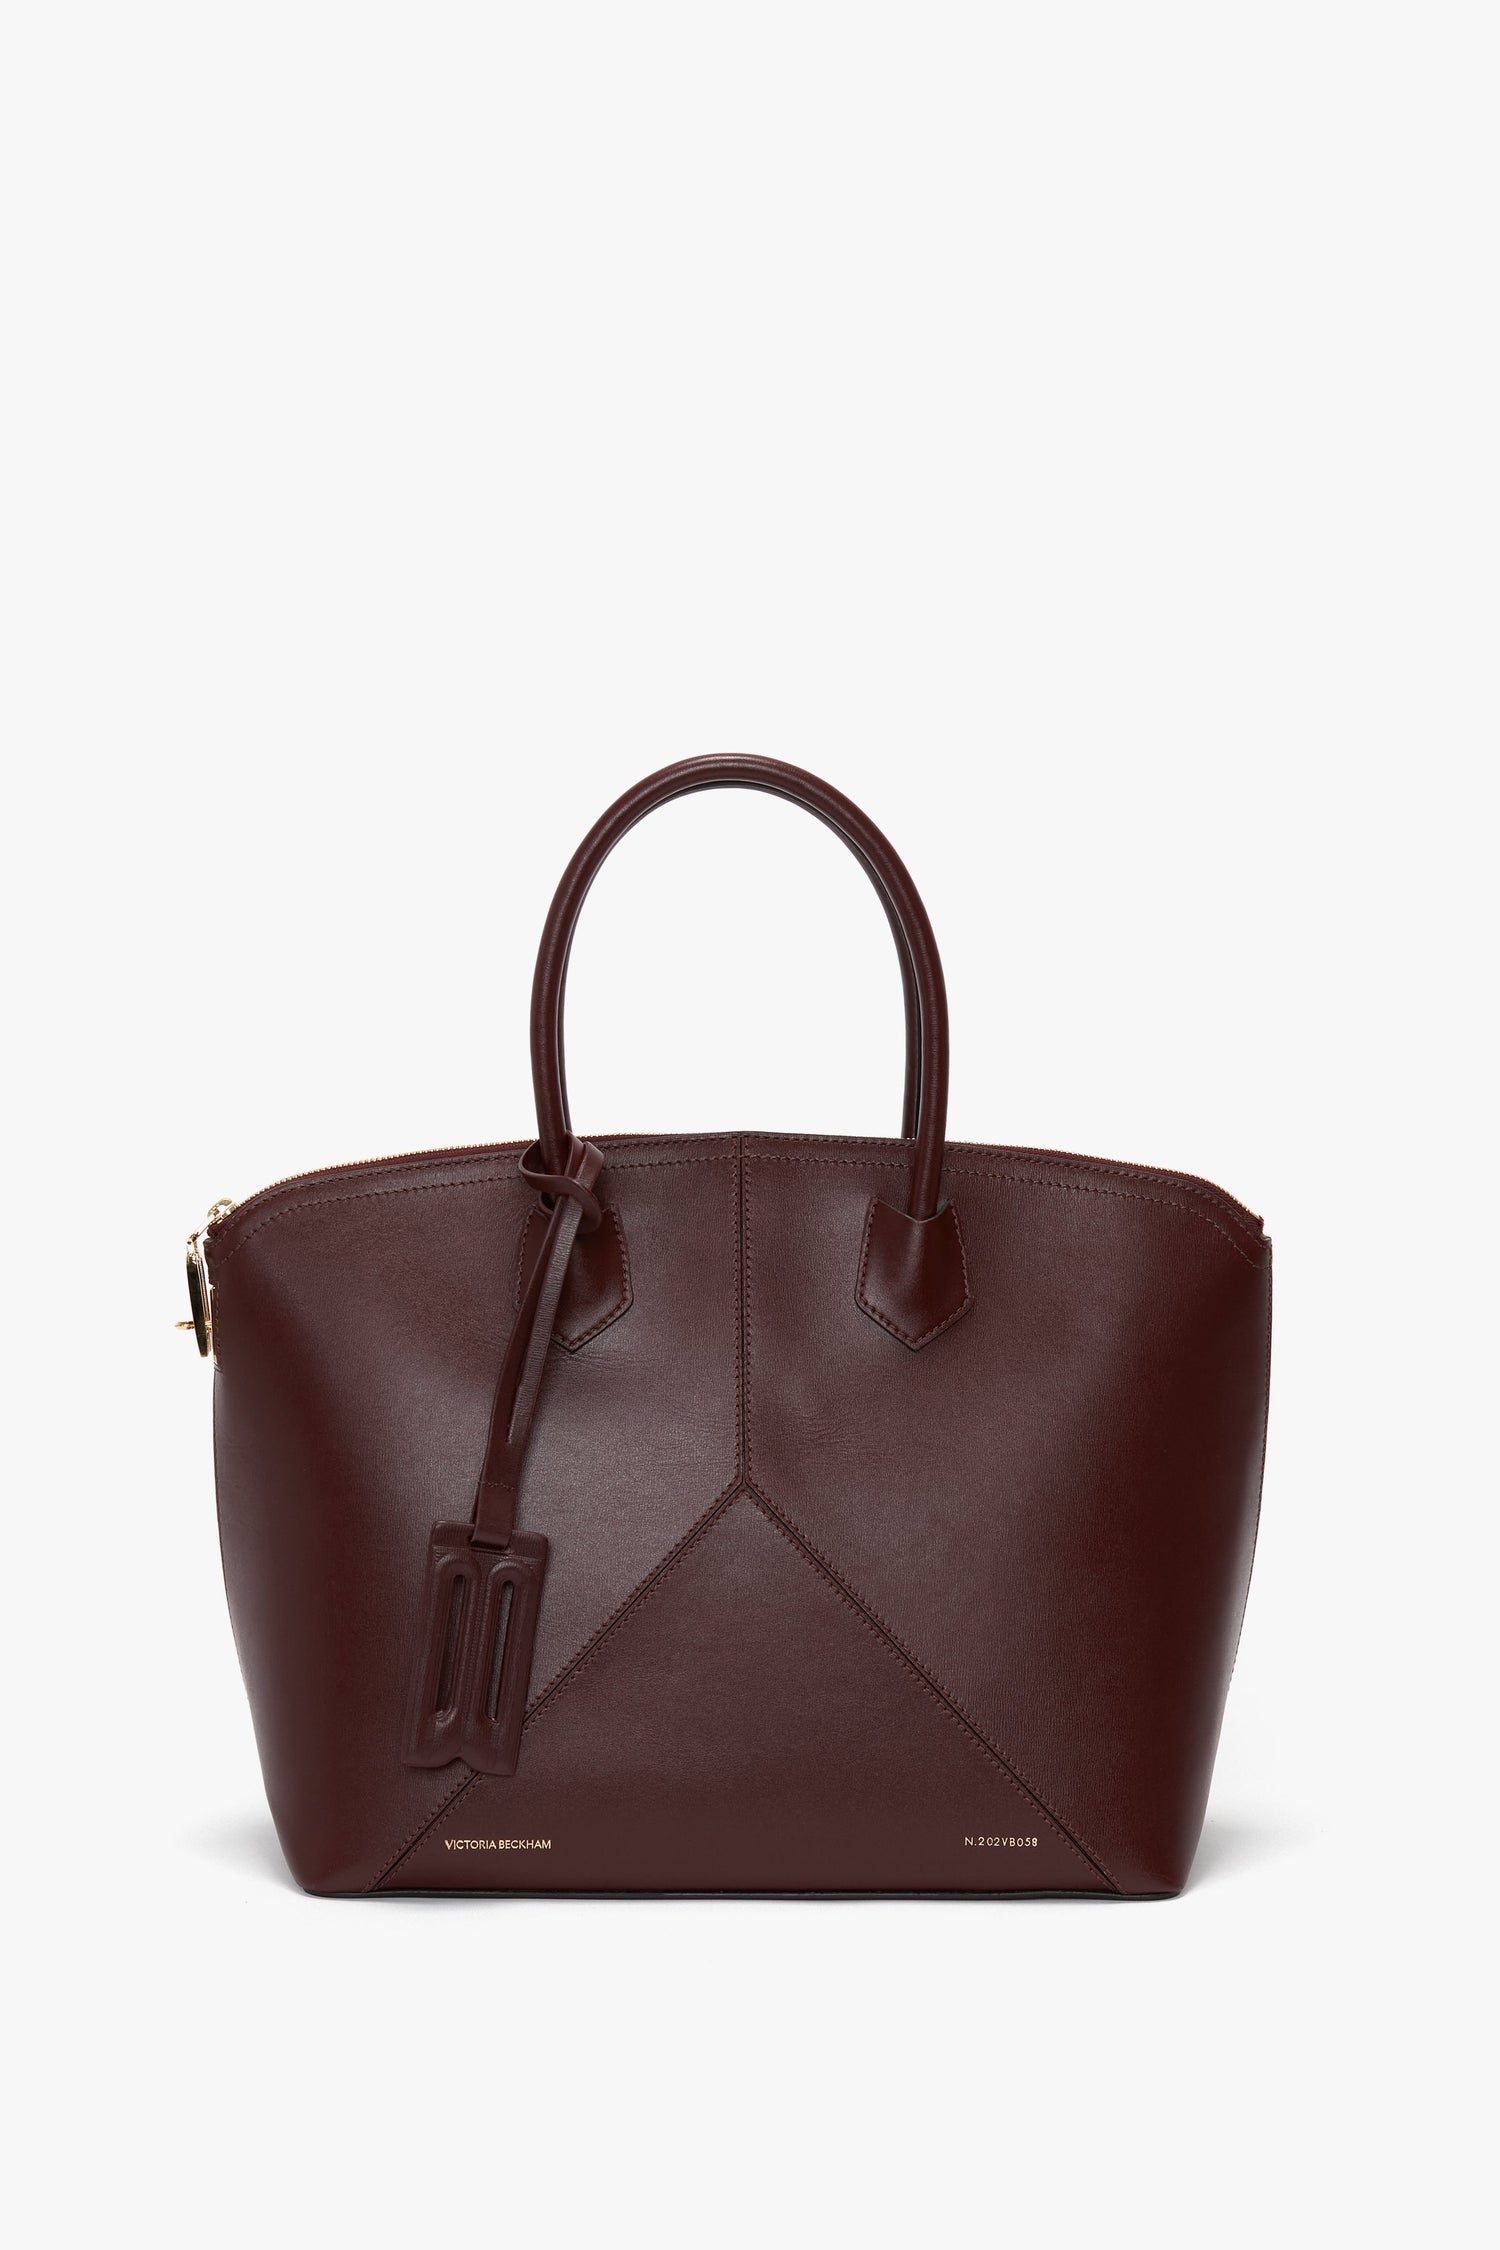 A burgundy leather Victoria Bag In Burgundy Leather by Victoria Beckham with a structured design, two top handles, a padlock closure, and a hanging charm accessory.